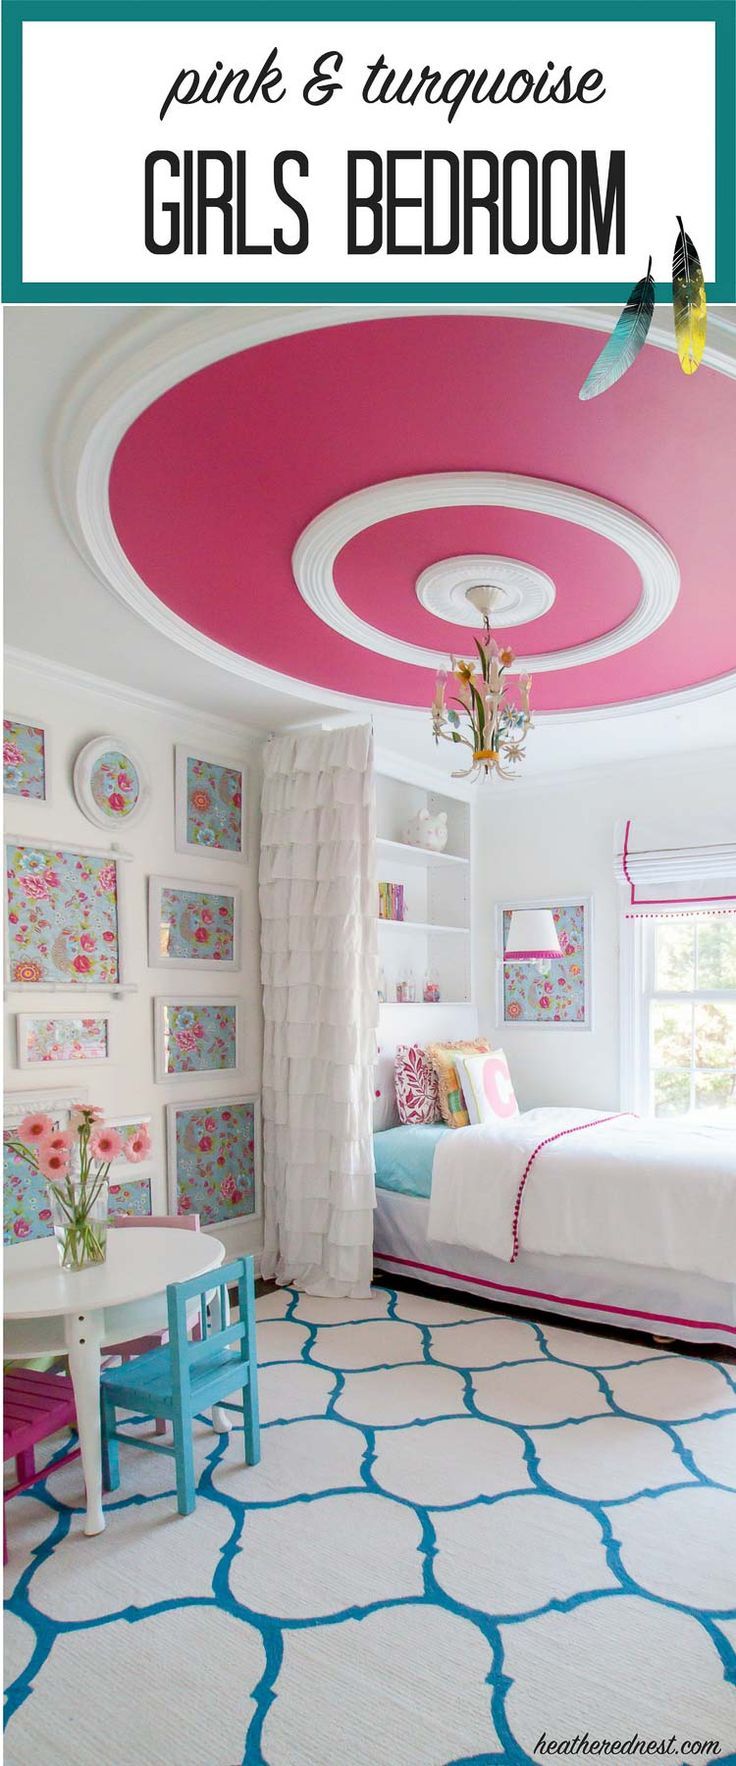 GORGEOUS! Turquoise and pink bedroom reveal from heatherednest.com LOVE the DIY ...